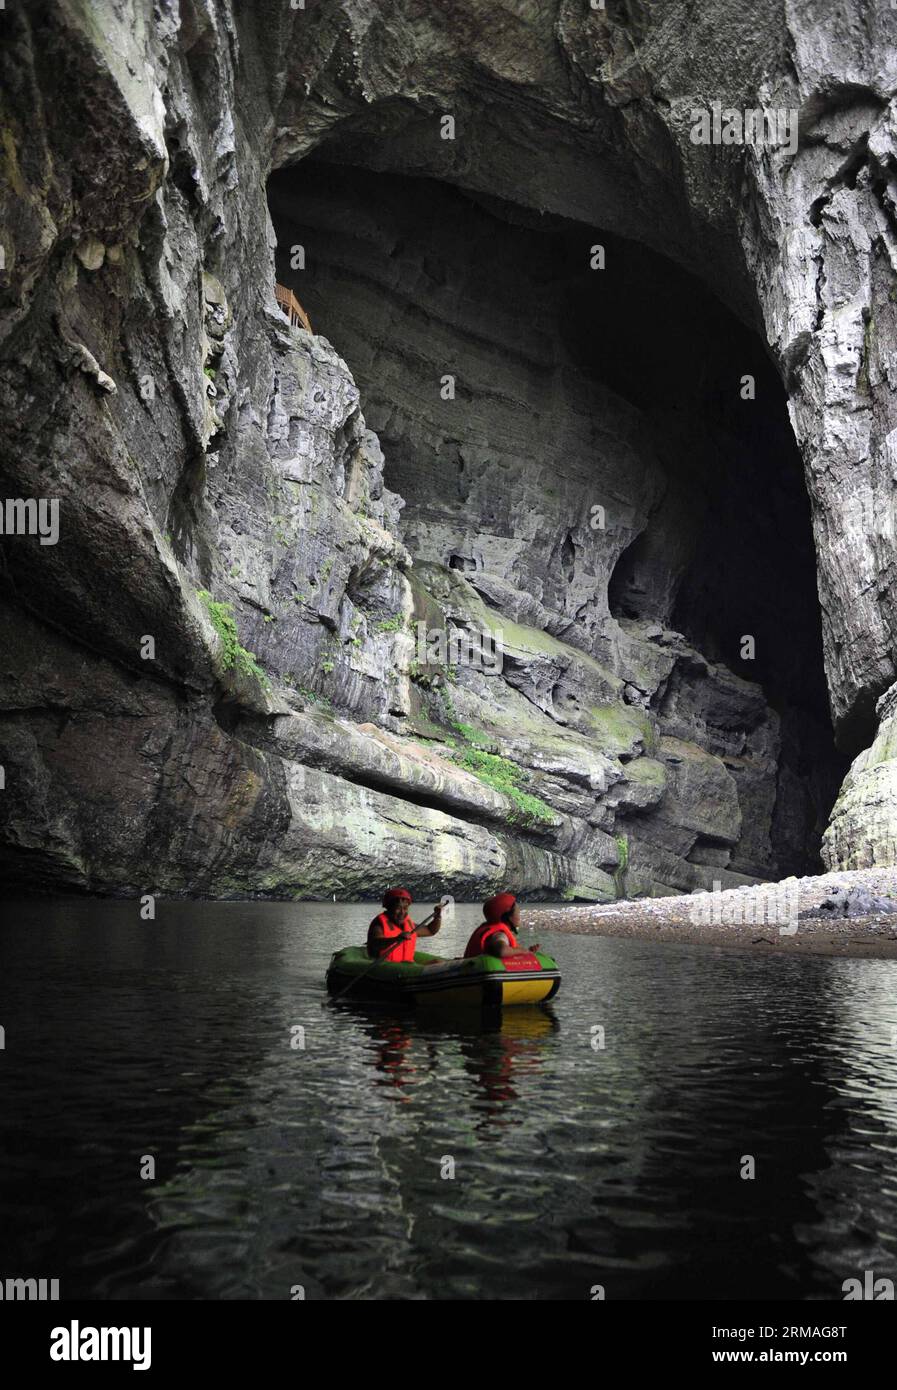 (140708) -- XIANFENG, July 8, 2014 (Xinhua) -- Tourists enjoy rafting in a cave within the Huangjindong Scenic Area in Xianfeng County, central China s Hubei Province, July 8, 2014. Many people sought refuge in whitewater rafting against the summer heat. (Xinhua/Yang Shunpi) (lmm) CHINA-SUMMER-LEISURE-RAFTING (CN) PUBLICATIONxNOTxINxCHN   Xian Feng July 8 2014 XINHUA tourists Enjoy Rafting in a Cave Within The  Scenic Area in Xian Feng County Central China S Hubei Province July 8 2014 MANY Celebrities sought Refuge in Whitewater Rafting against The Summer Heat XINHUA Yang Shunpi lmm China Summ Stock Photo